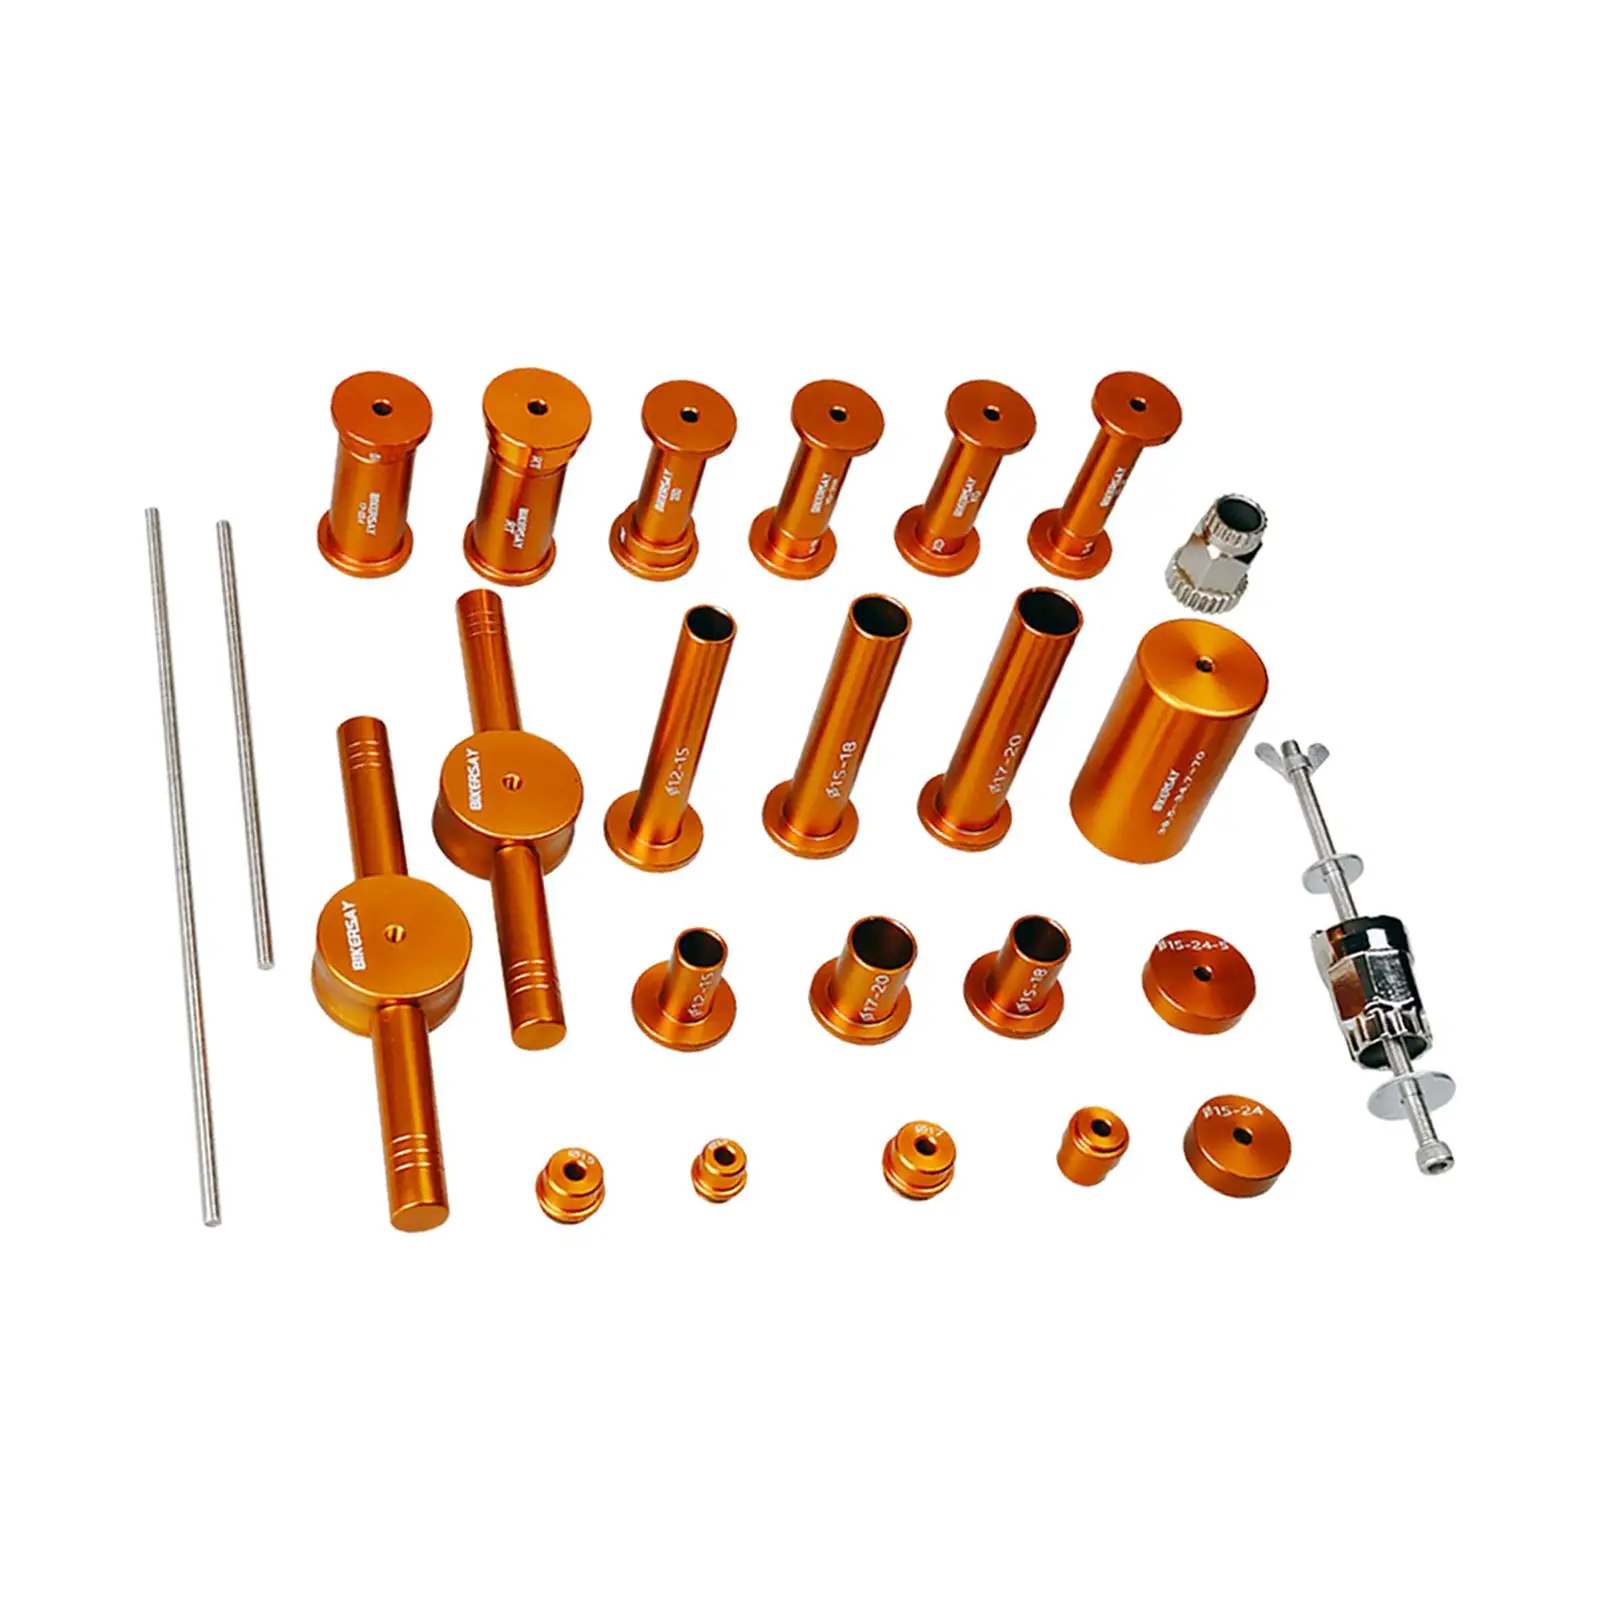 Bearing Loading and Unloading Set Durable Metal Freehub Remover Professional